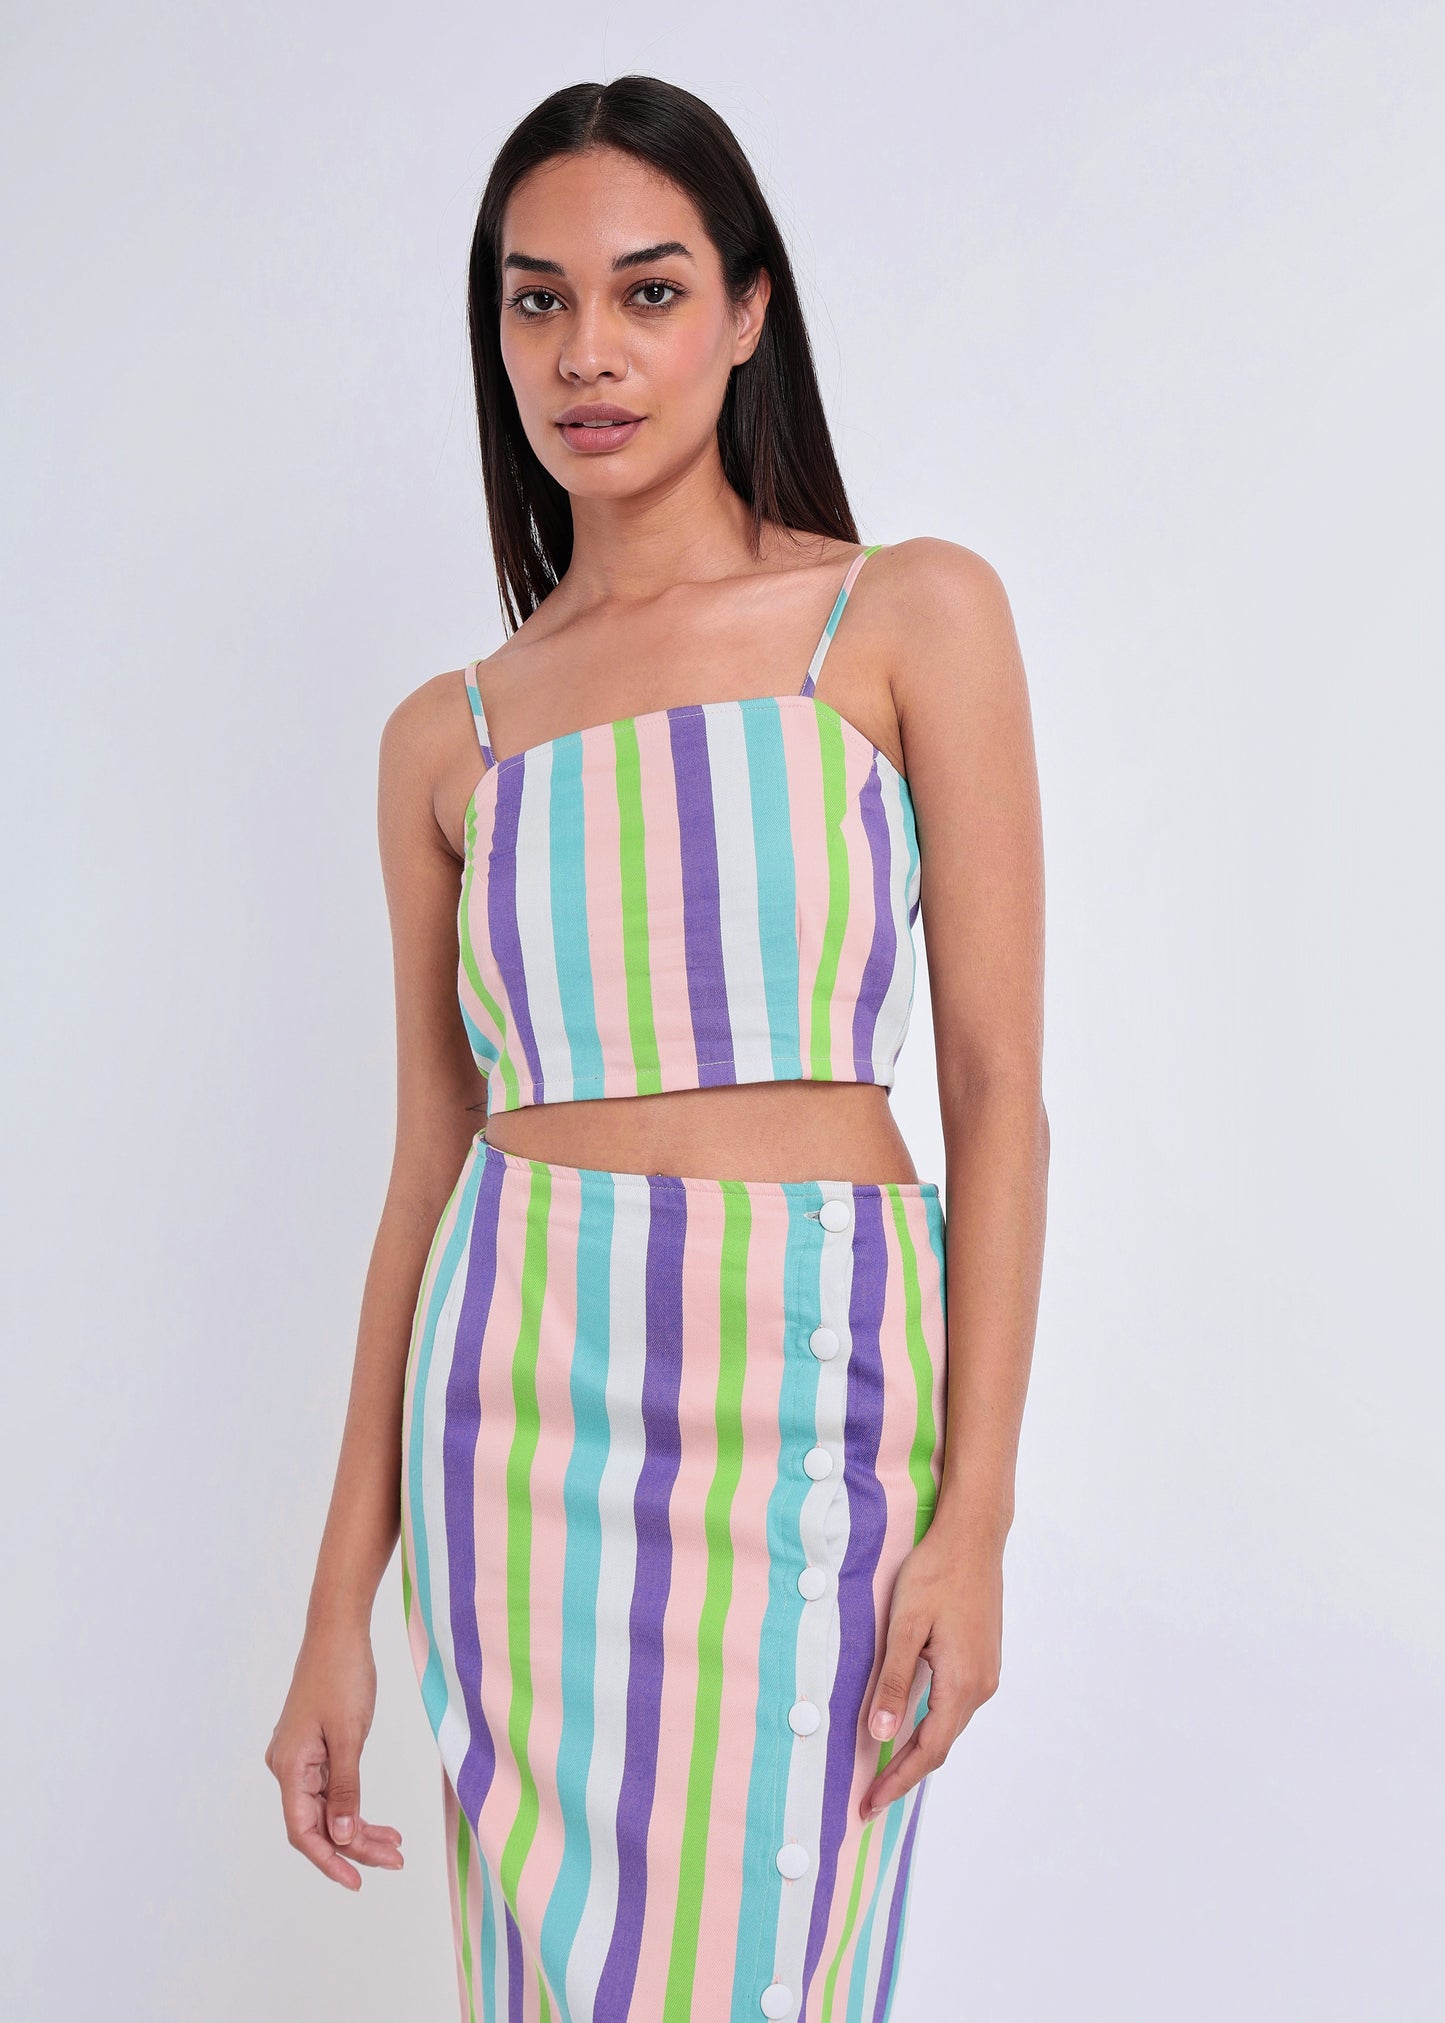 Striped Crop Top - Handloom, Recycled Clime Scene